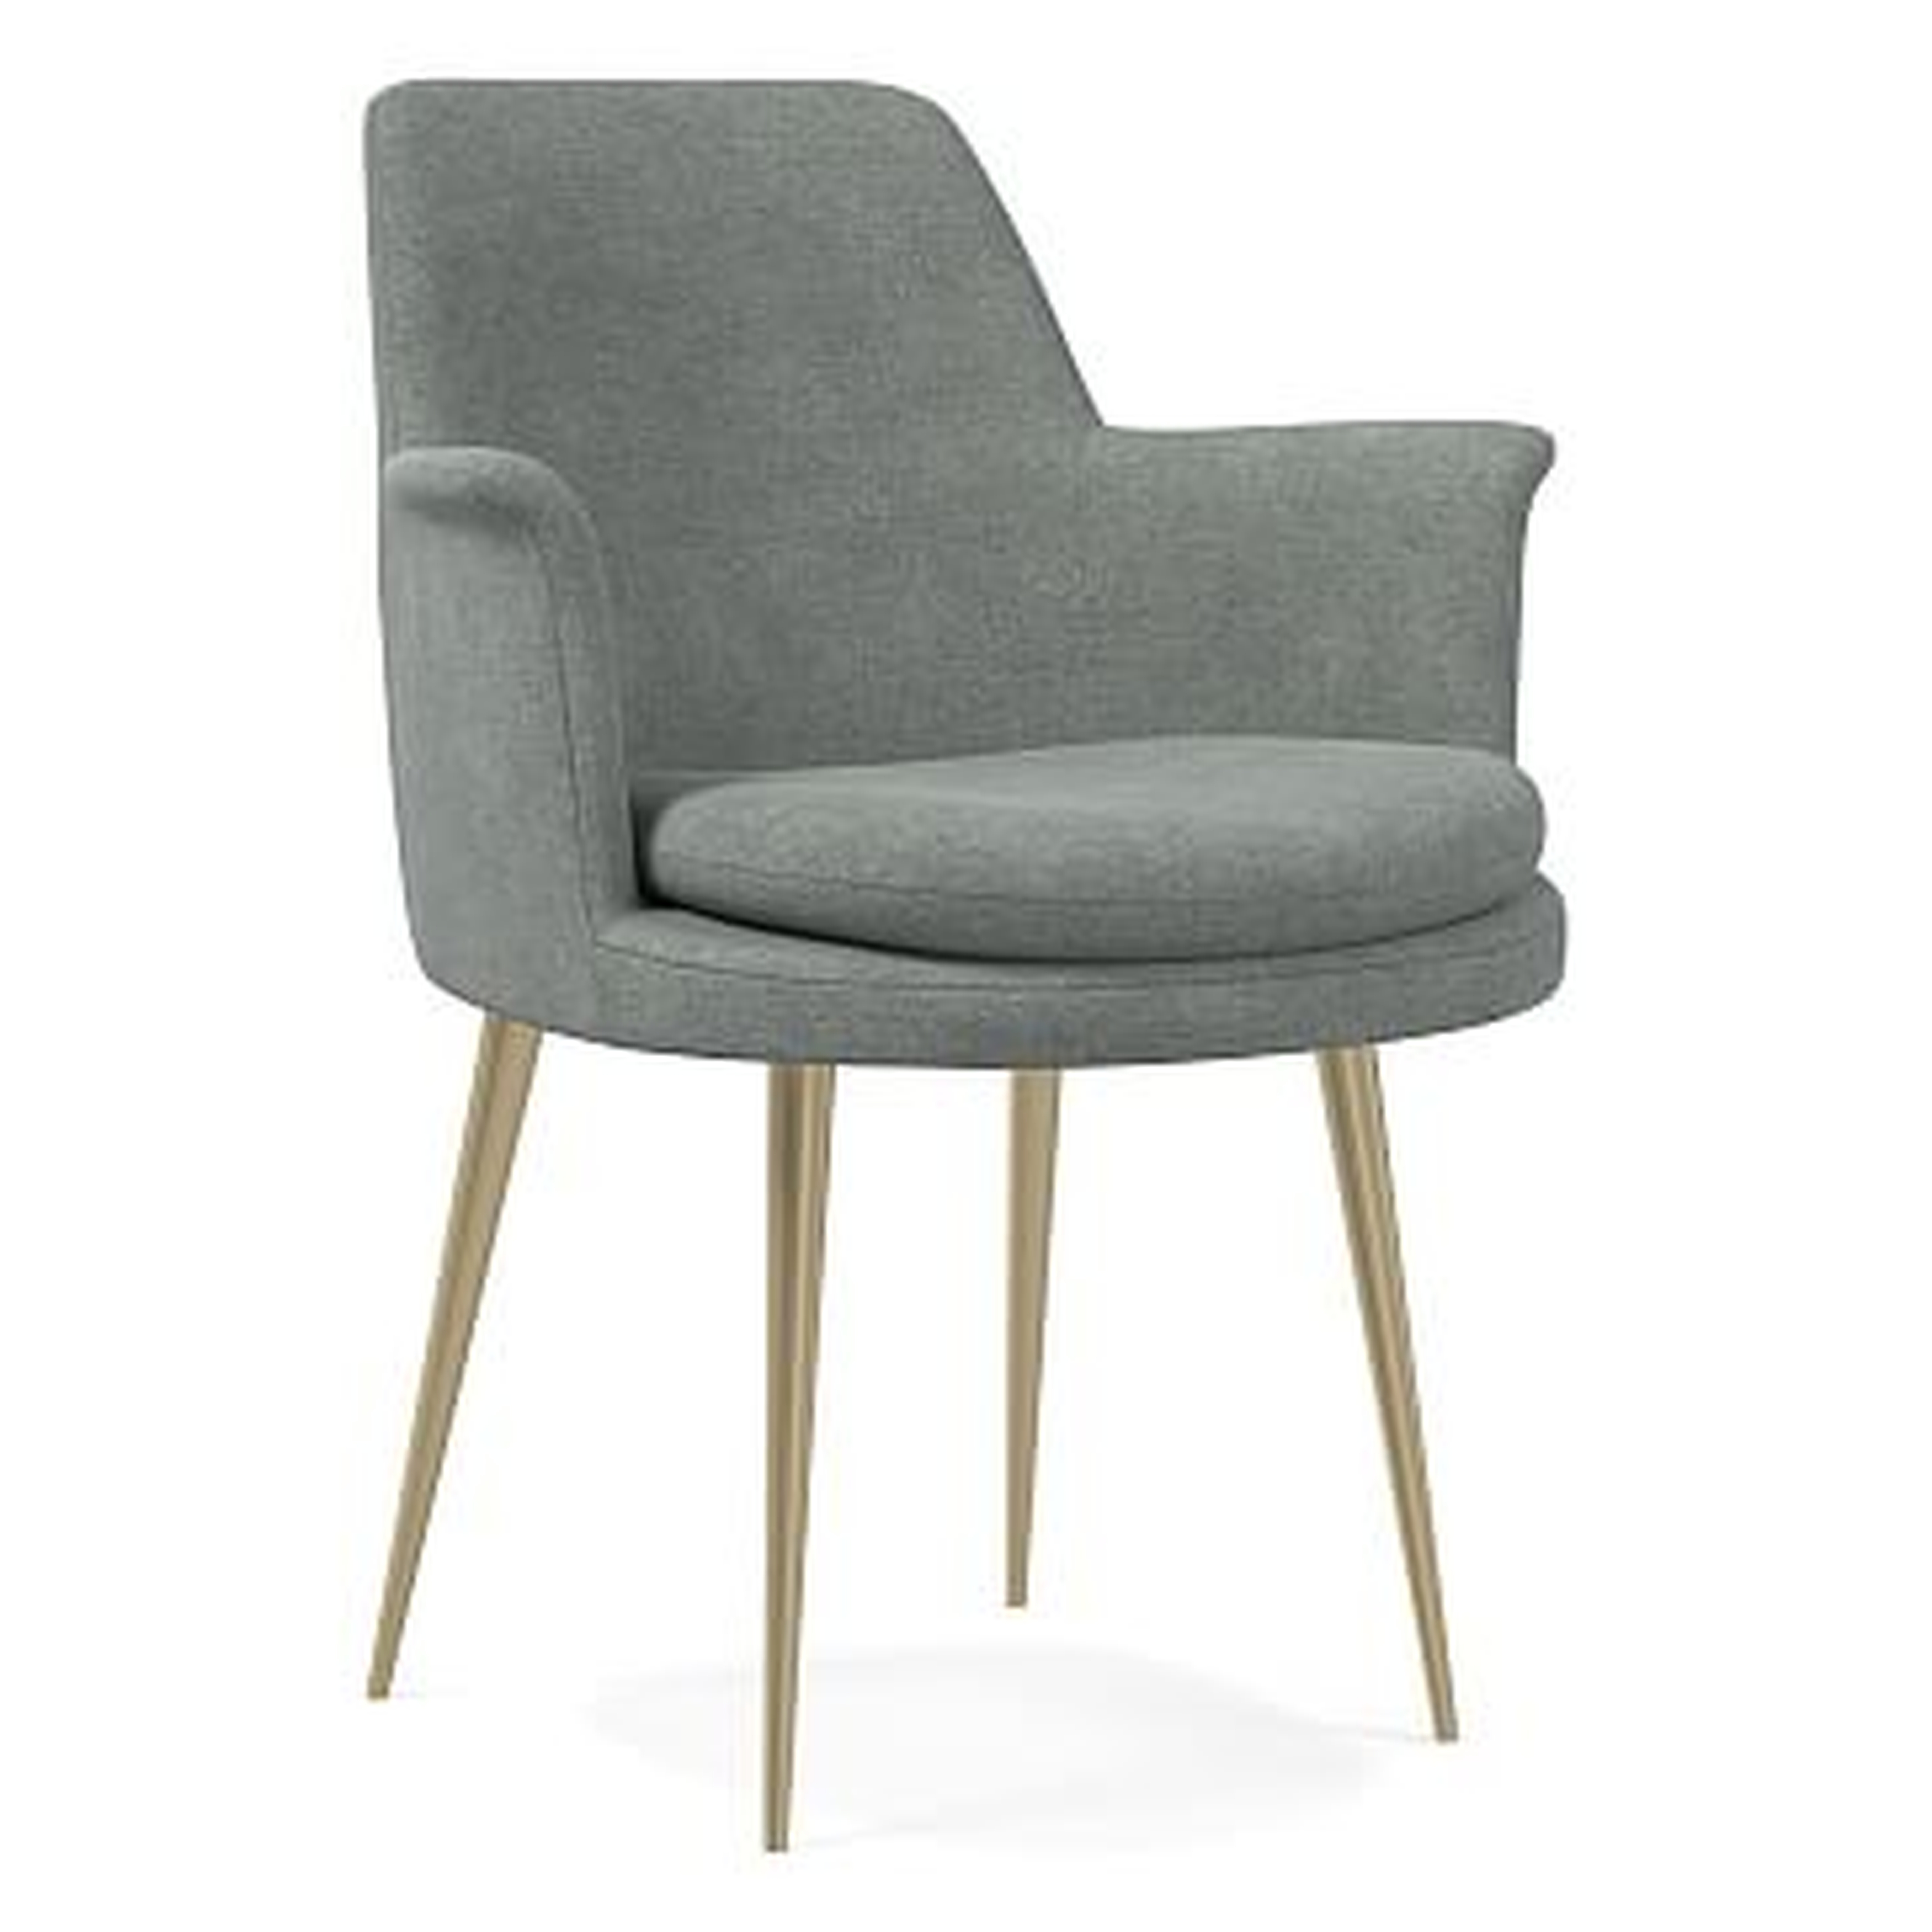 Finley Wing Dining Chair, Distressed Velvet, Mineral Gray, Light Bronze - West Elm